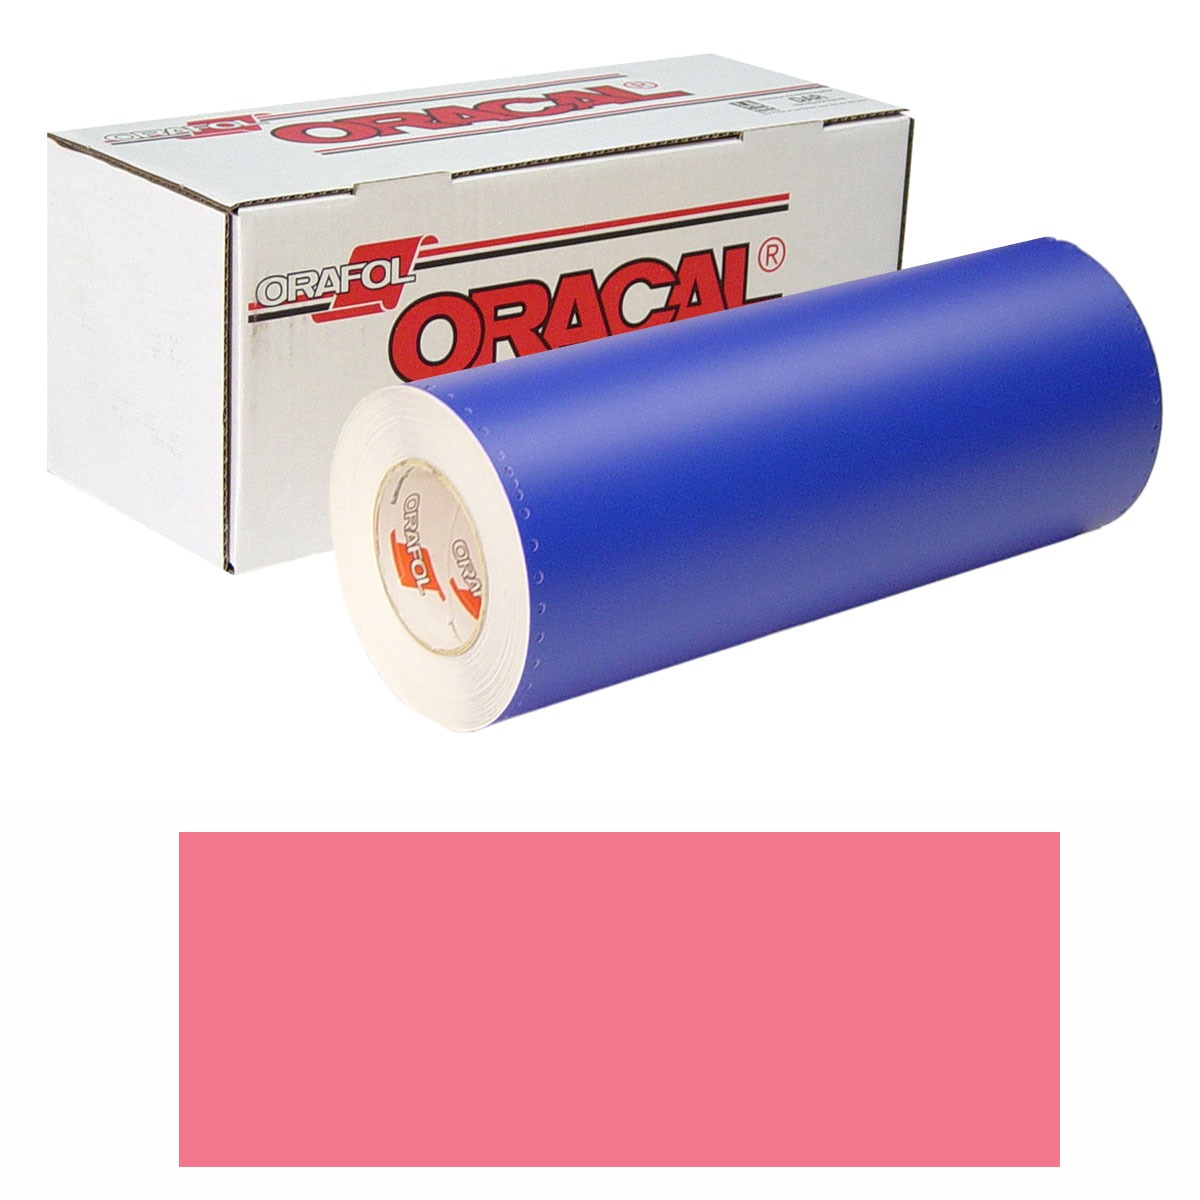 ORACAL 8300 15in X 50yd 032 Light Red